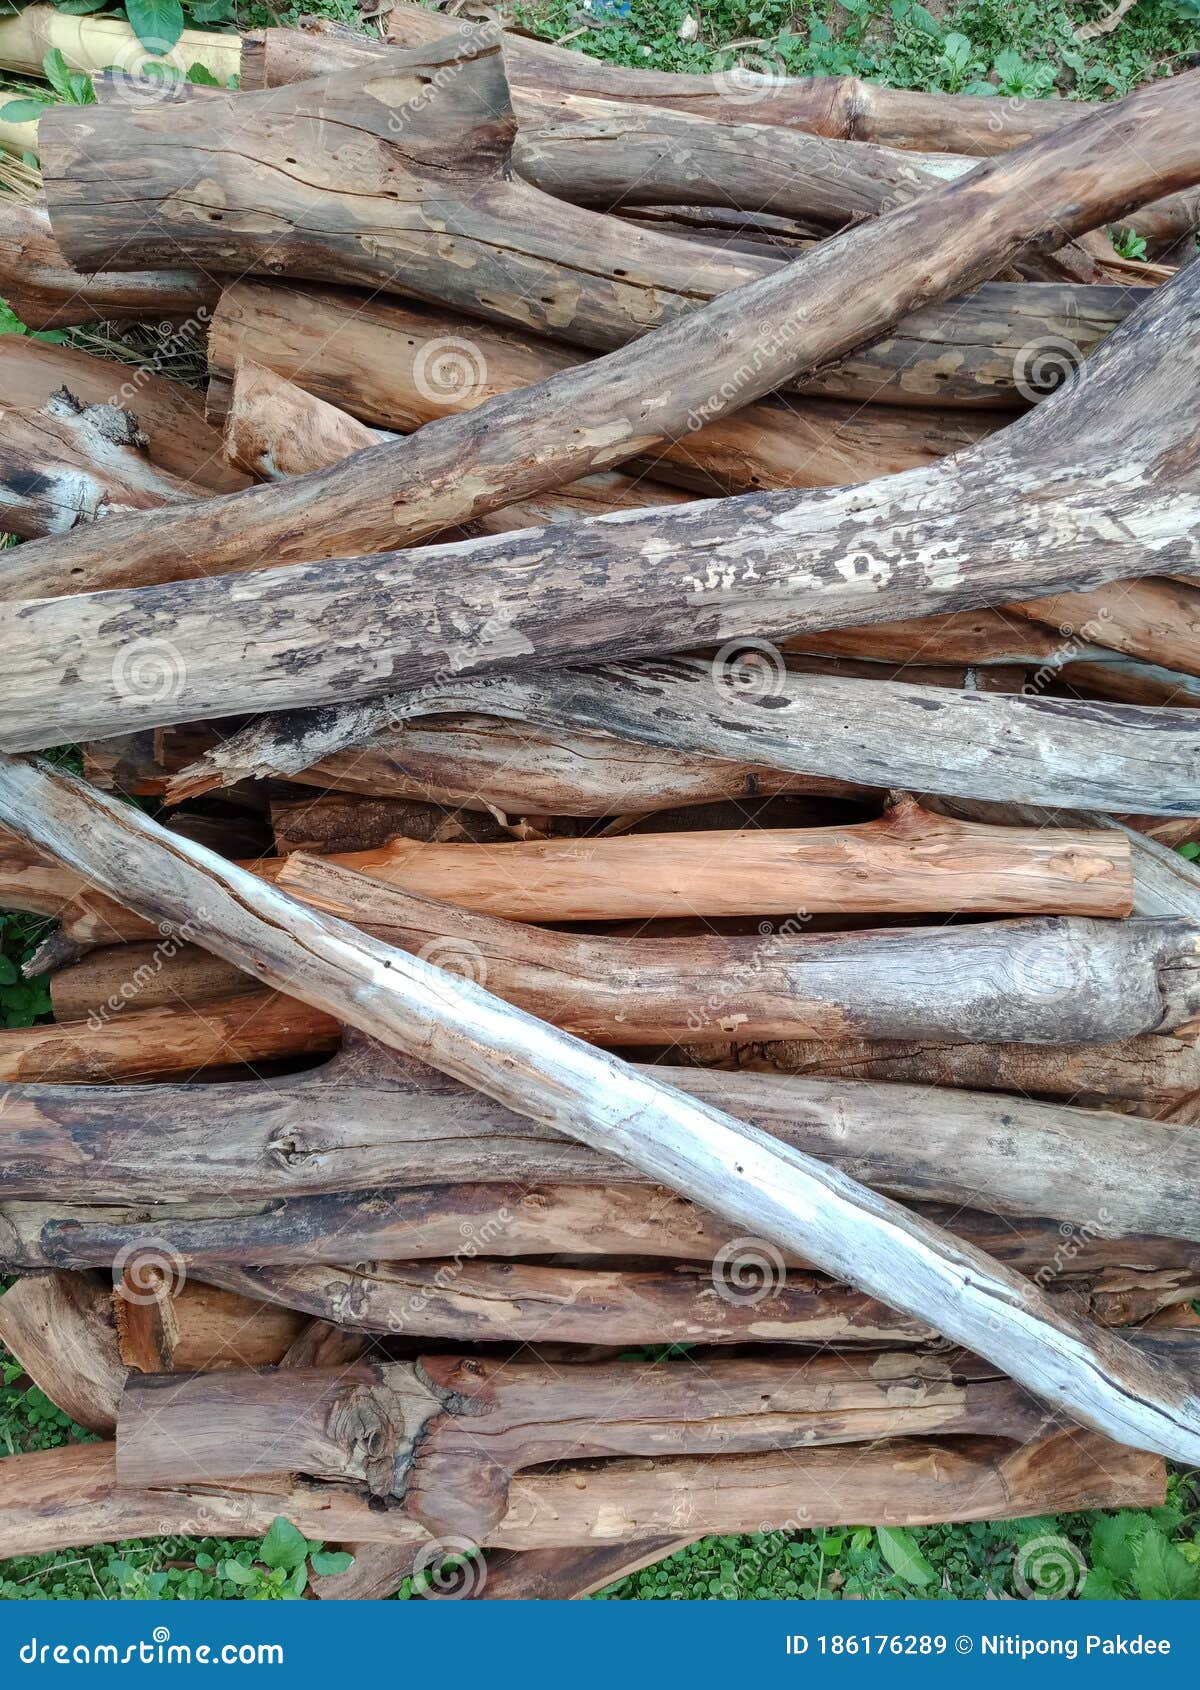 Details Wood And Useless Old Logs Can Be Made Into Firewood Stock Image Image Of Board Wood 186176289